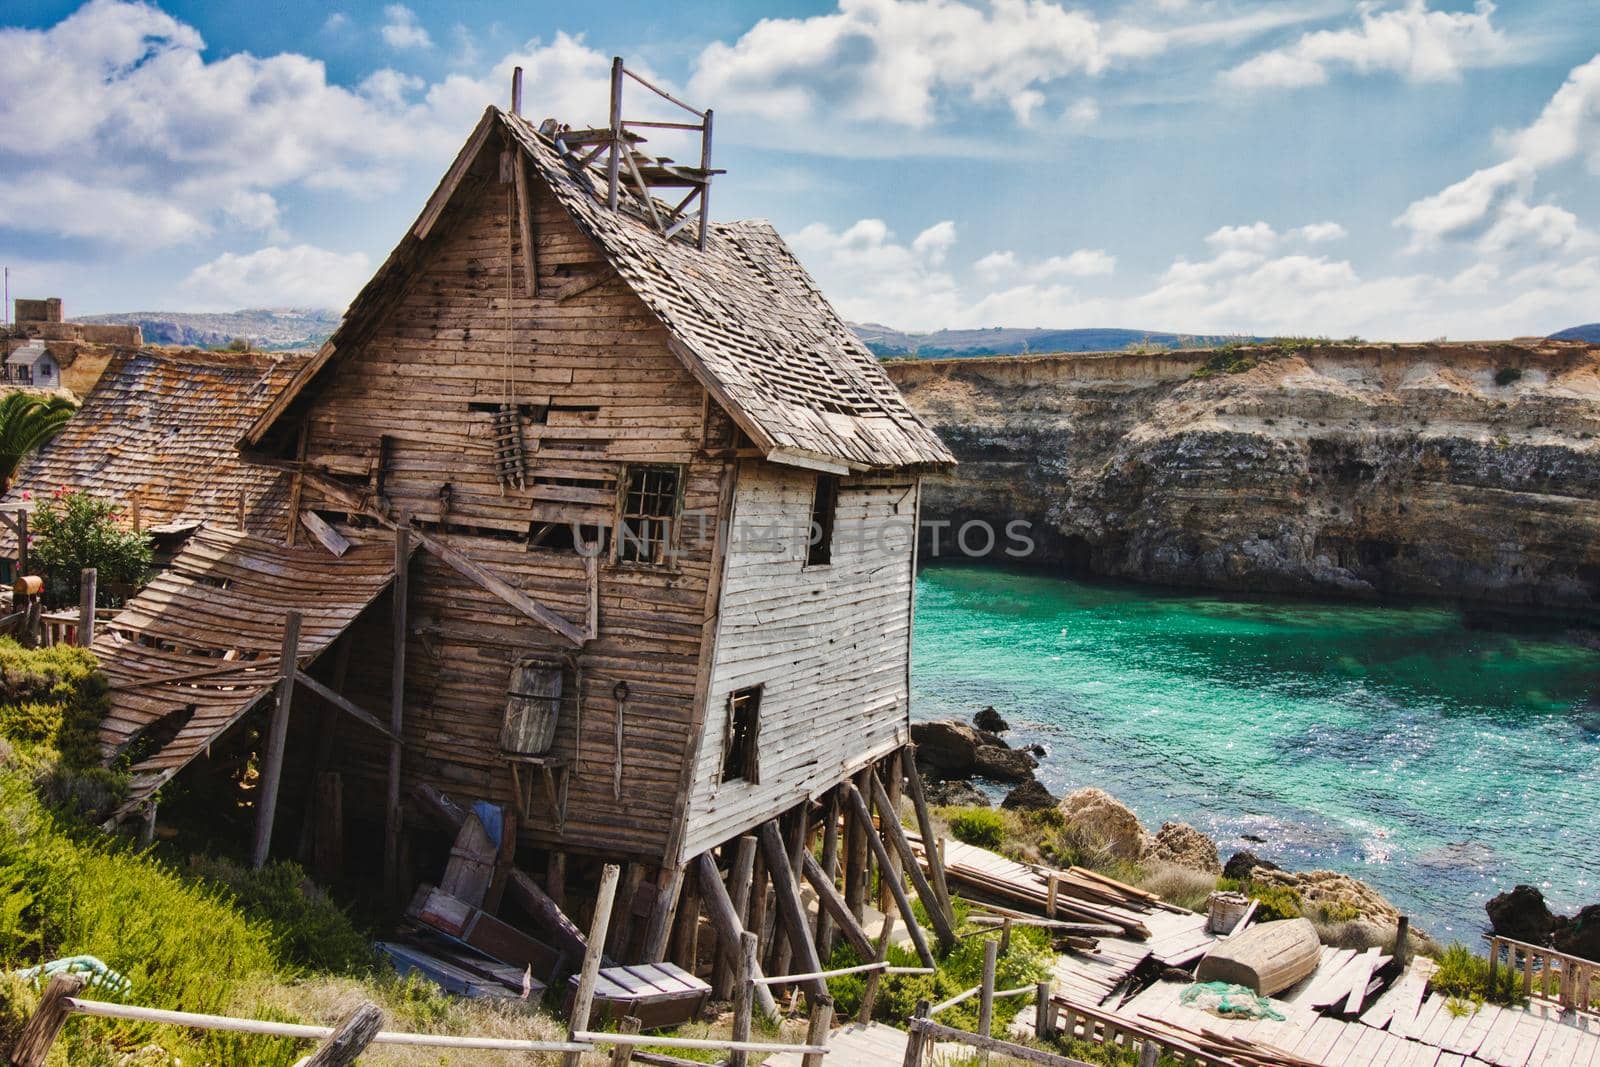 Old abandoned house on the edge of a cliff overlooking the sea and cliffs in the background by tennesseewitney